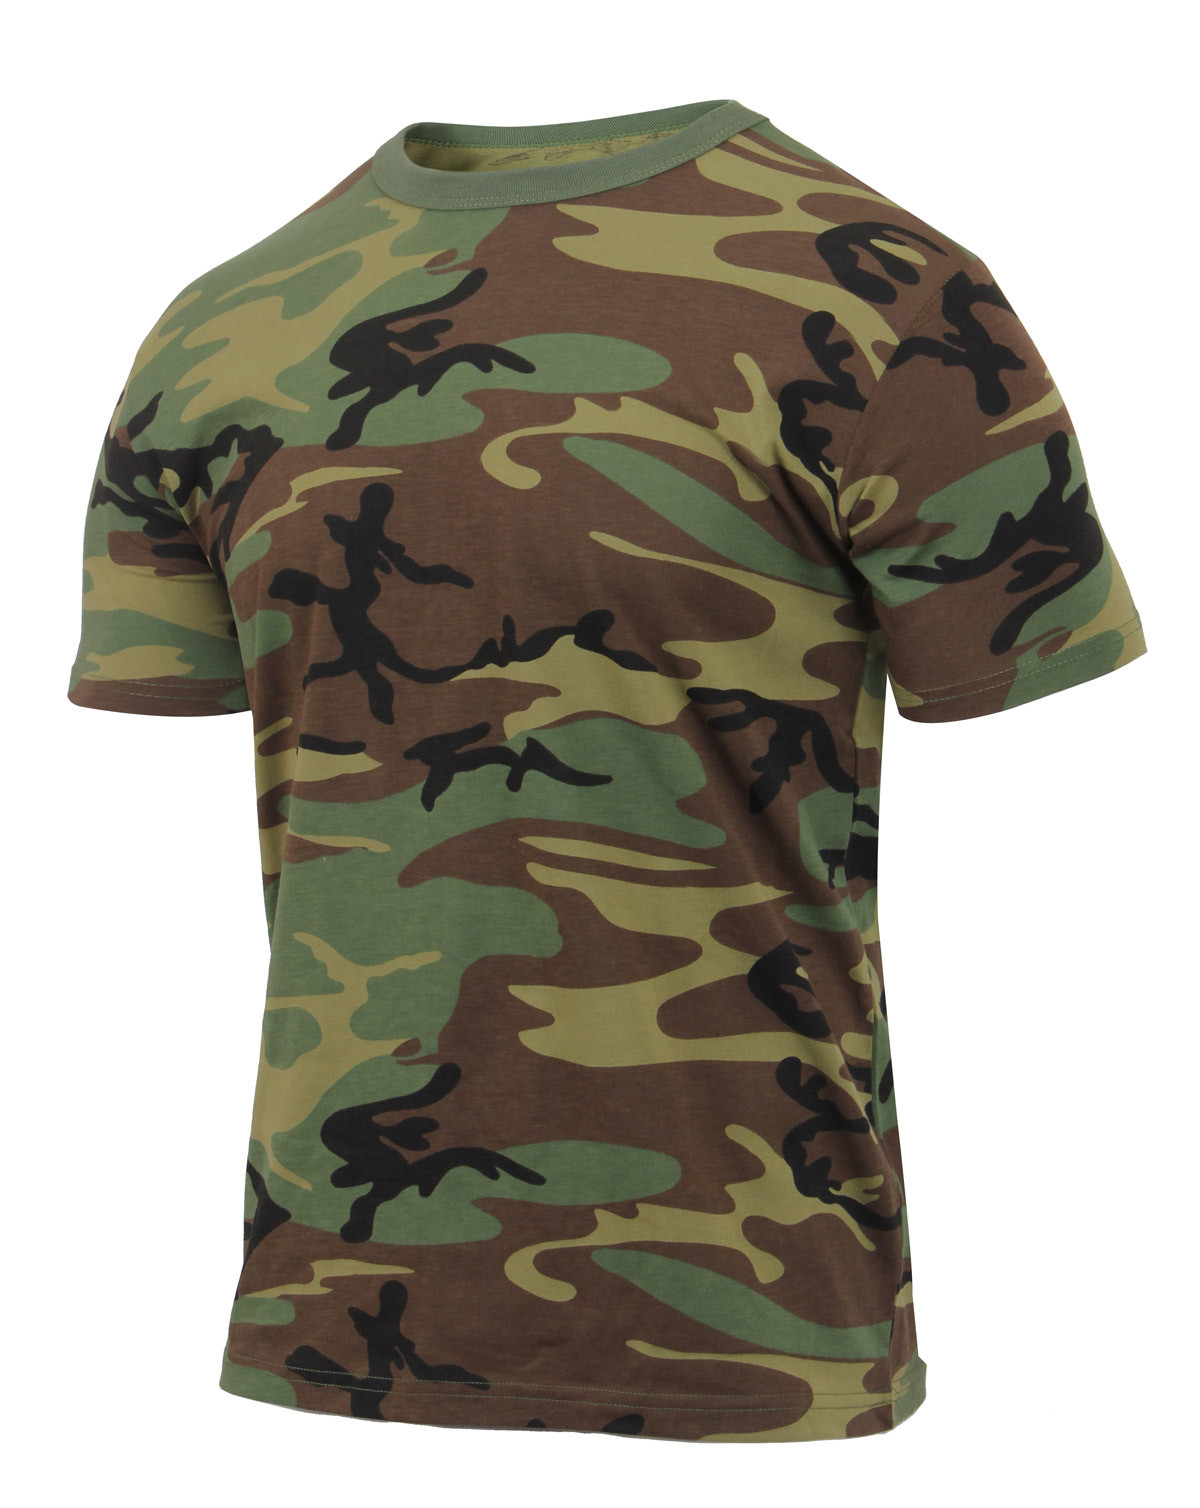 Rothco Camouflage T-Shirt, Athletic Fit (Woodland, S)